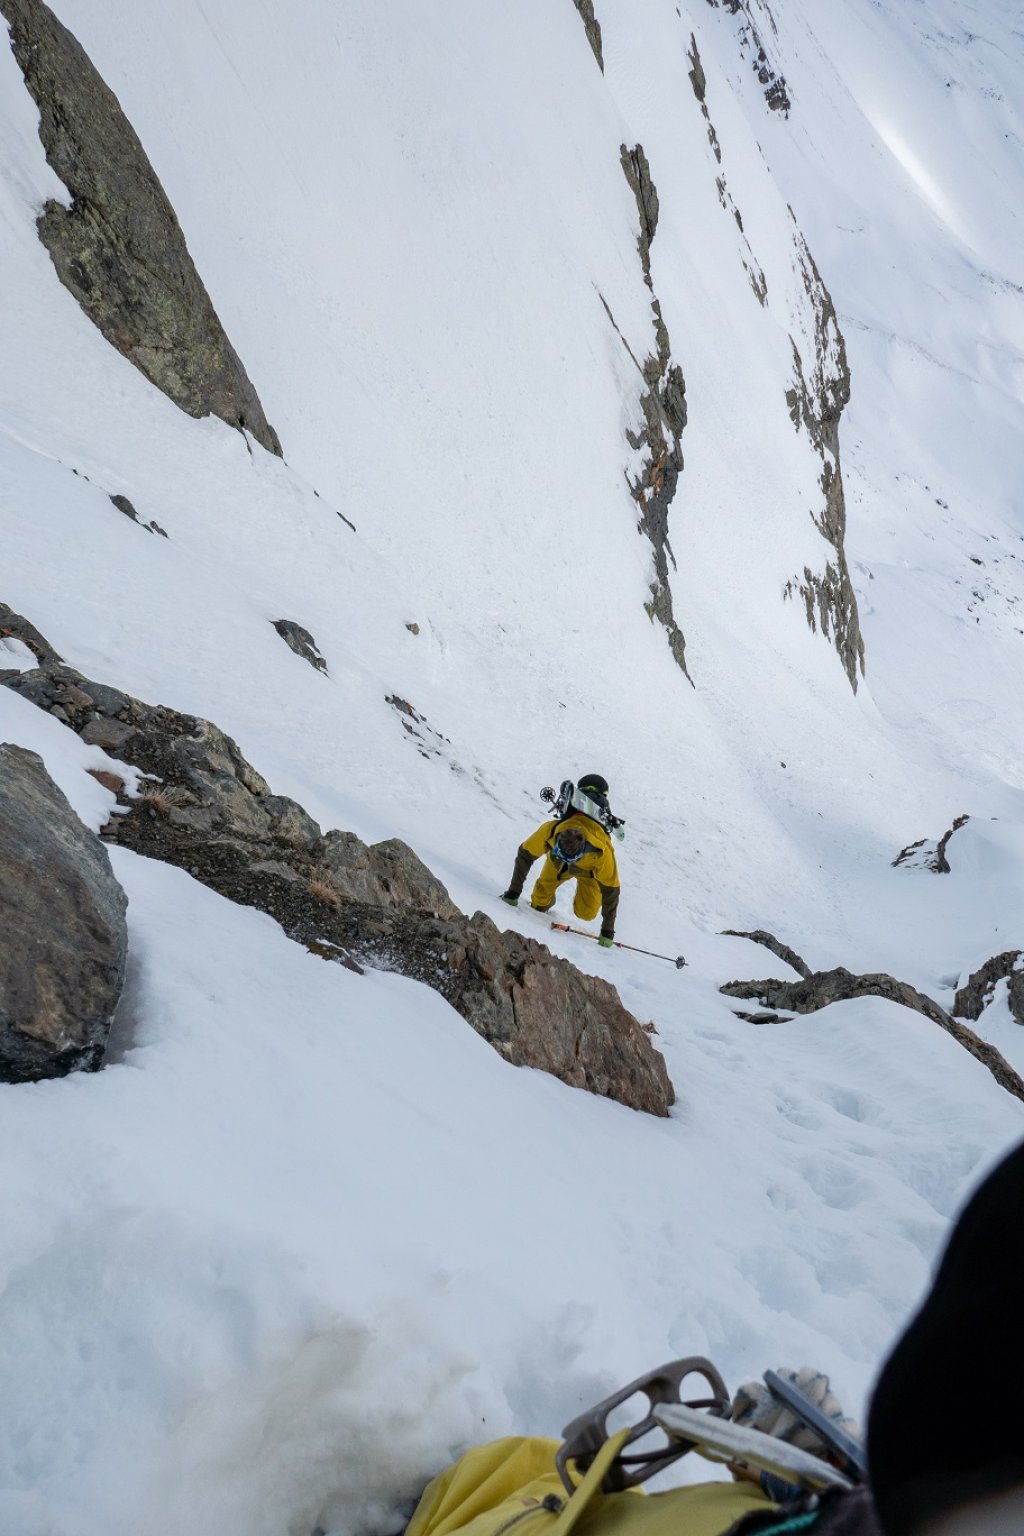 On the ascent to the couloir